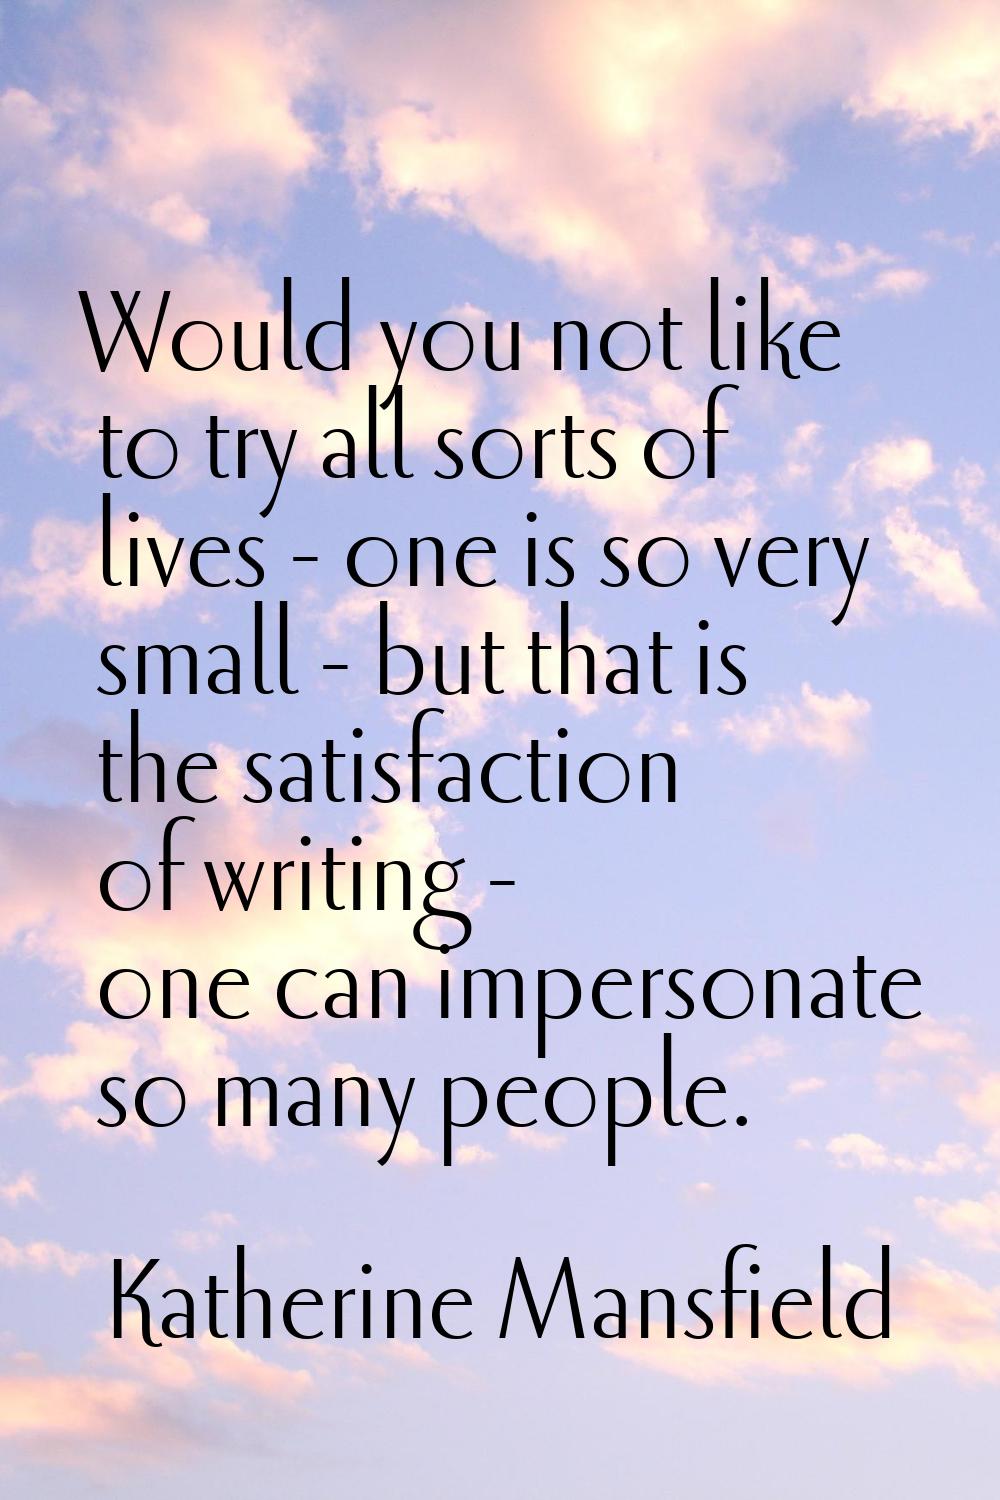 Would you not like to try all sorts of lives - one is so very small - but that is the satisfaction 